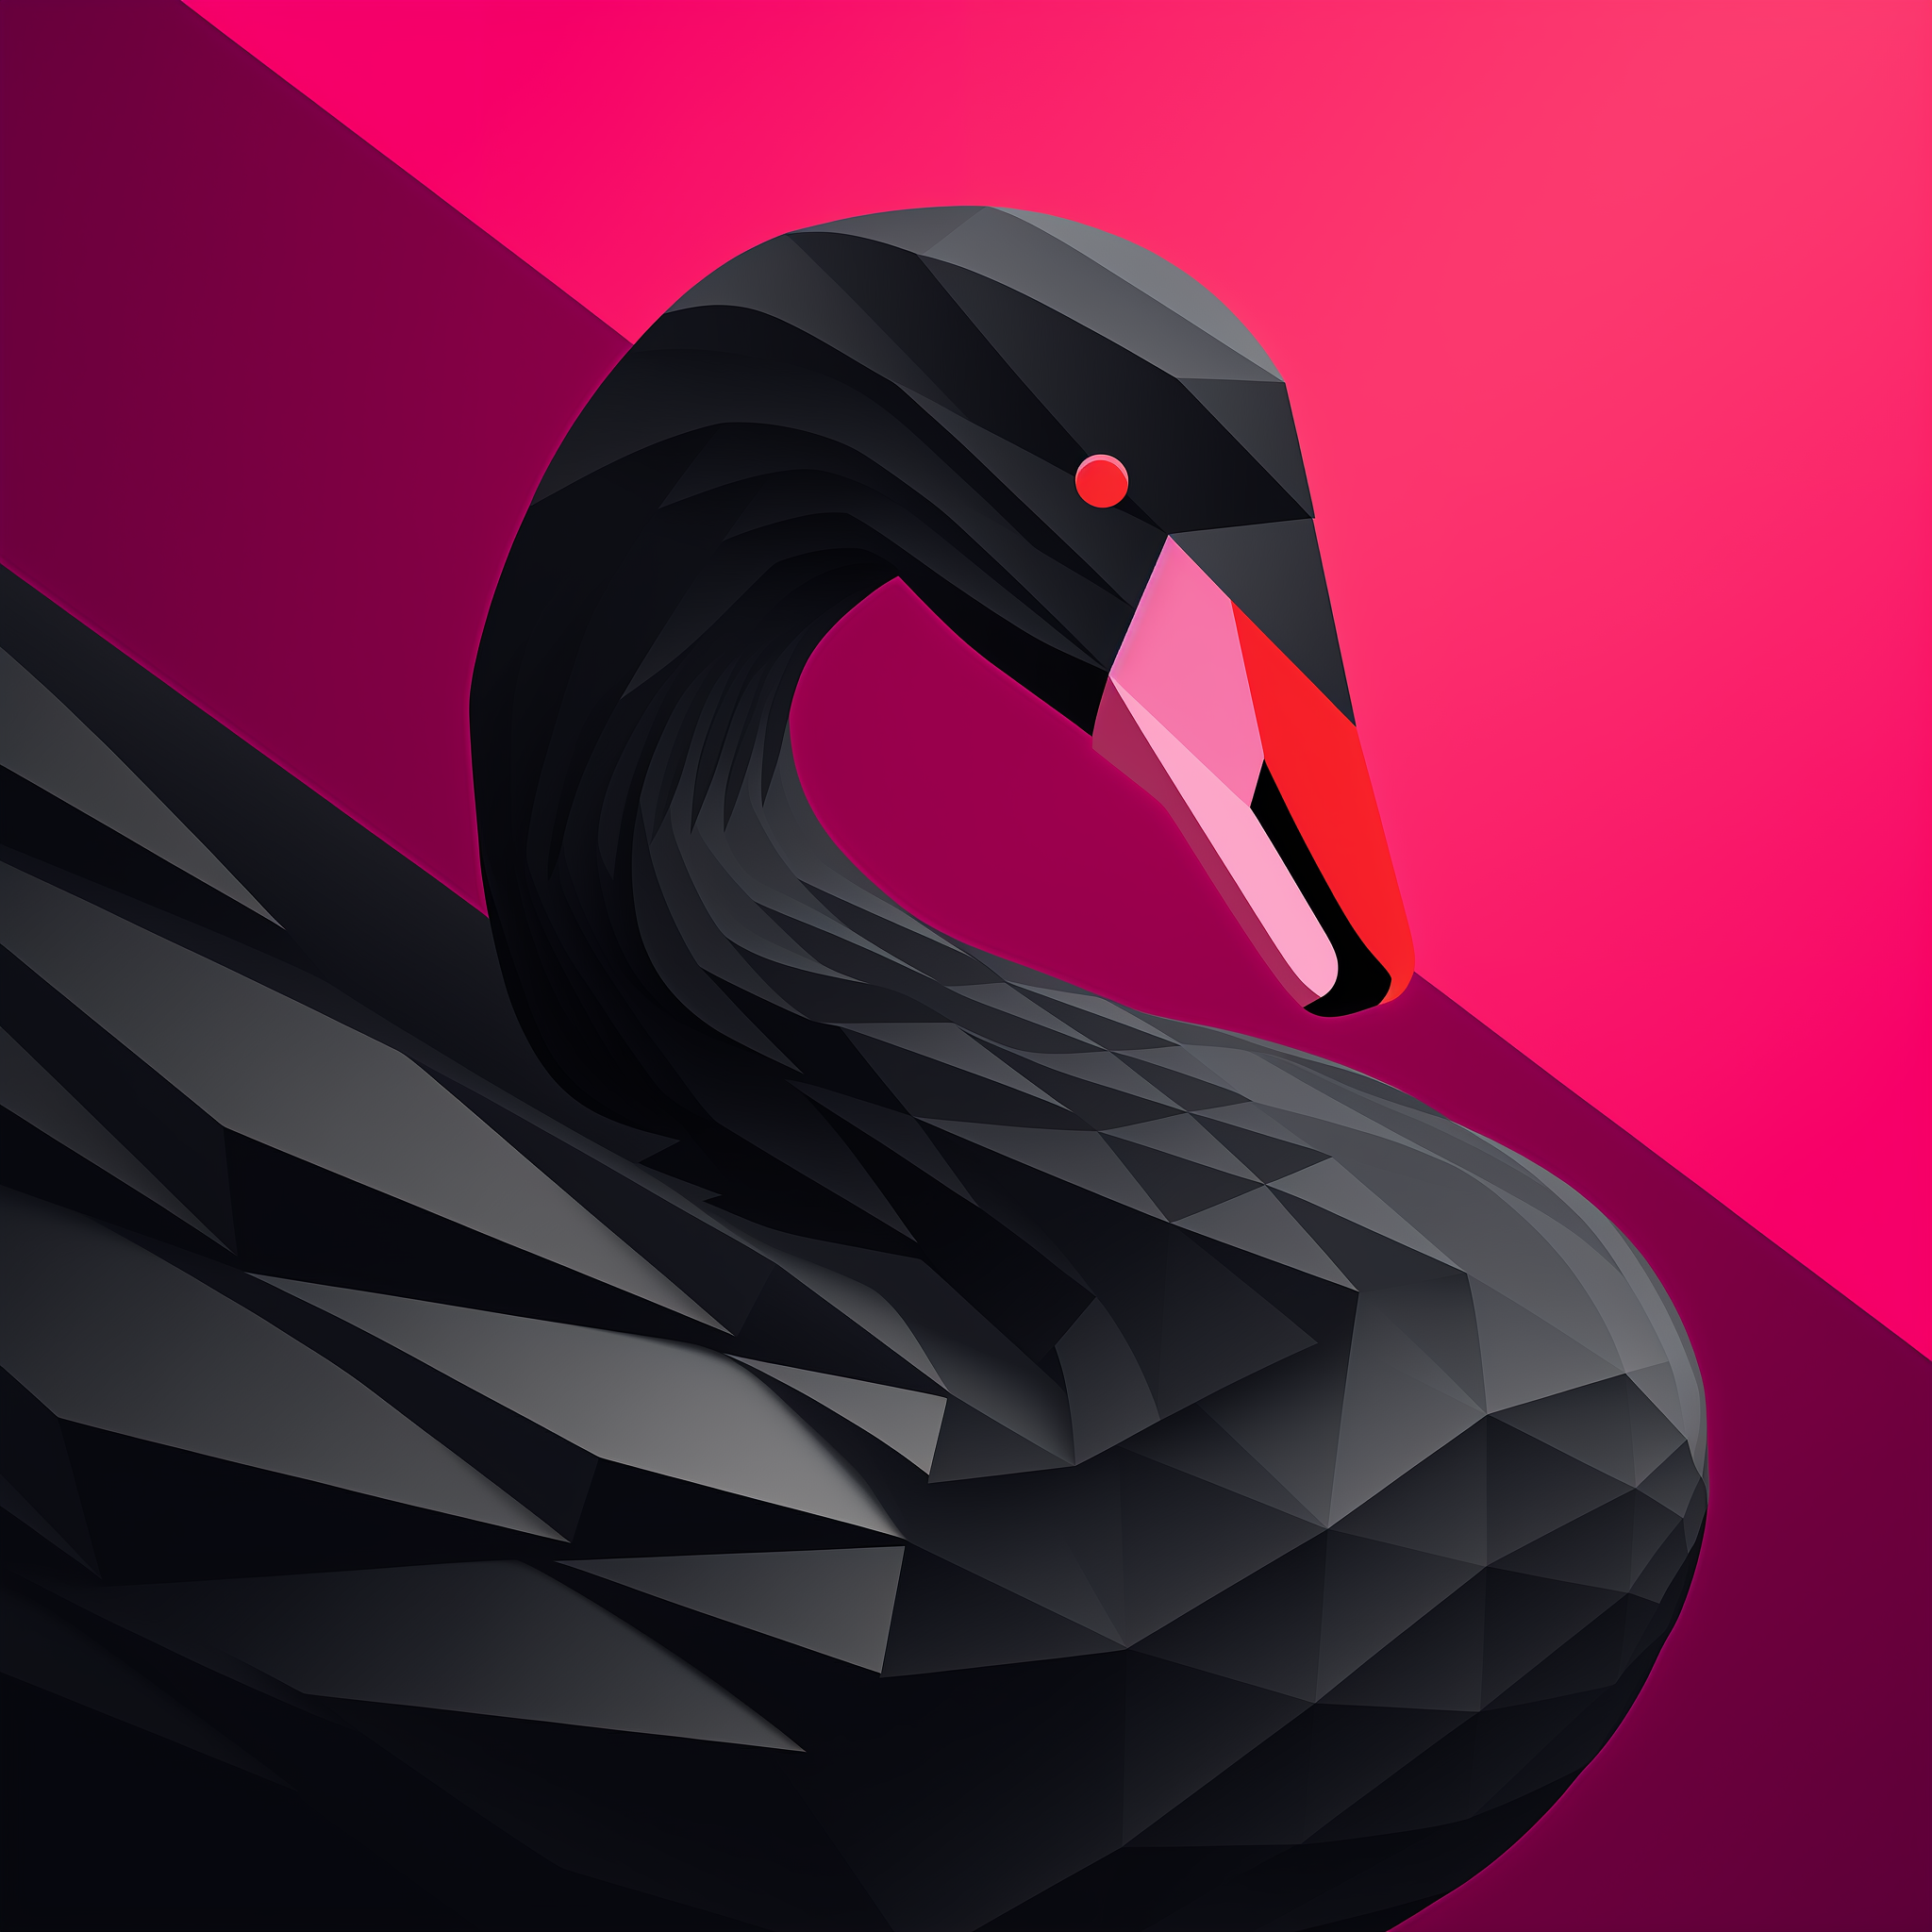 Minimalist black swan avatar with a vibrant pink background, ideal for profile picture use.